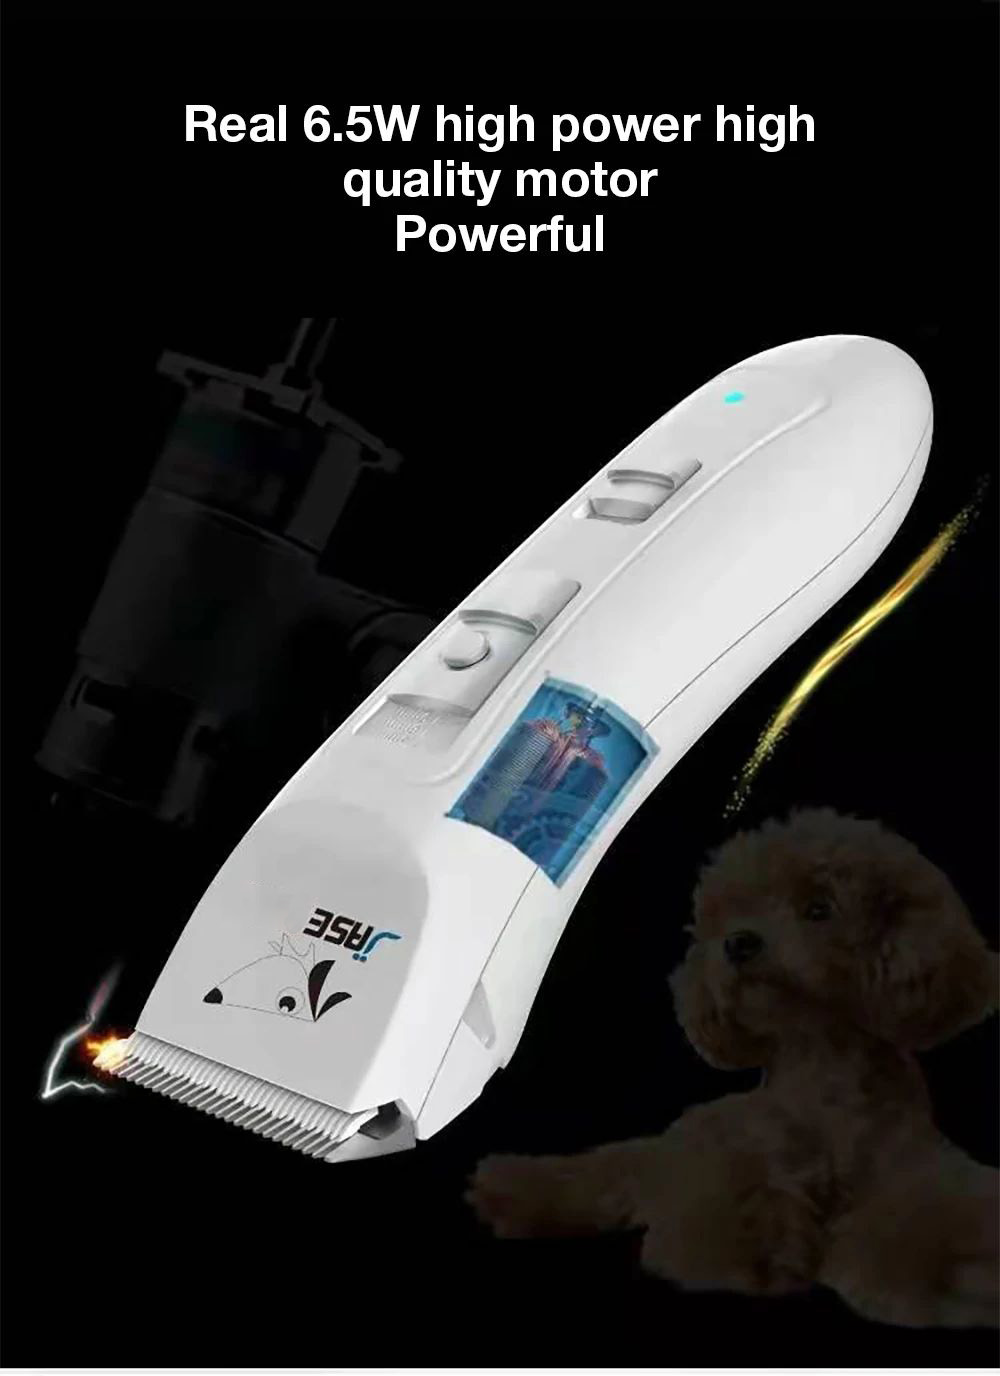 XIAOMI YOUPIN JASE PC-902 Dog Hair Clipper Trimmer USB Charging Grooming Electric Scissors Shaver Pet Supplies